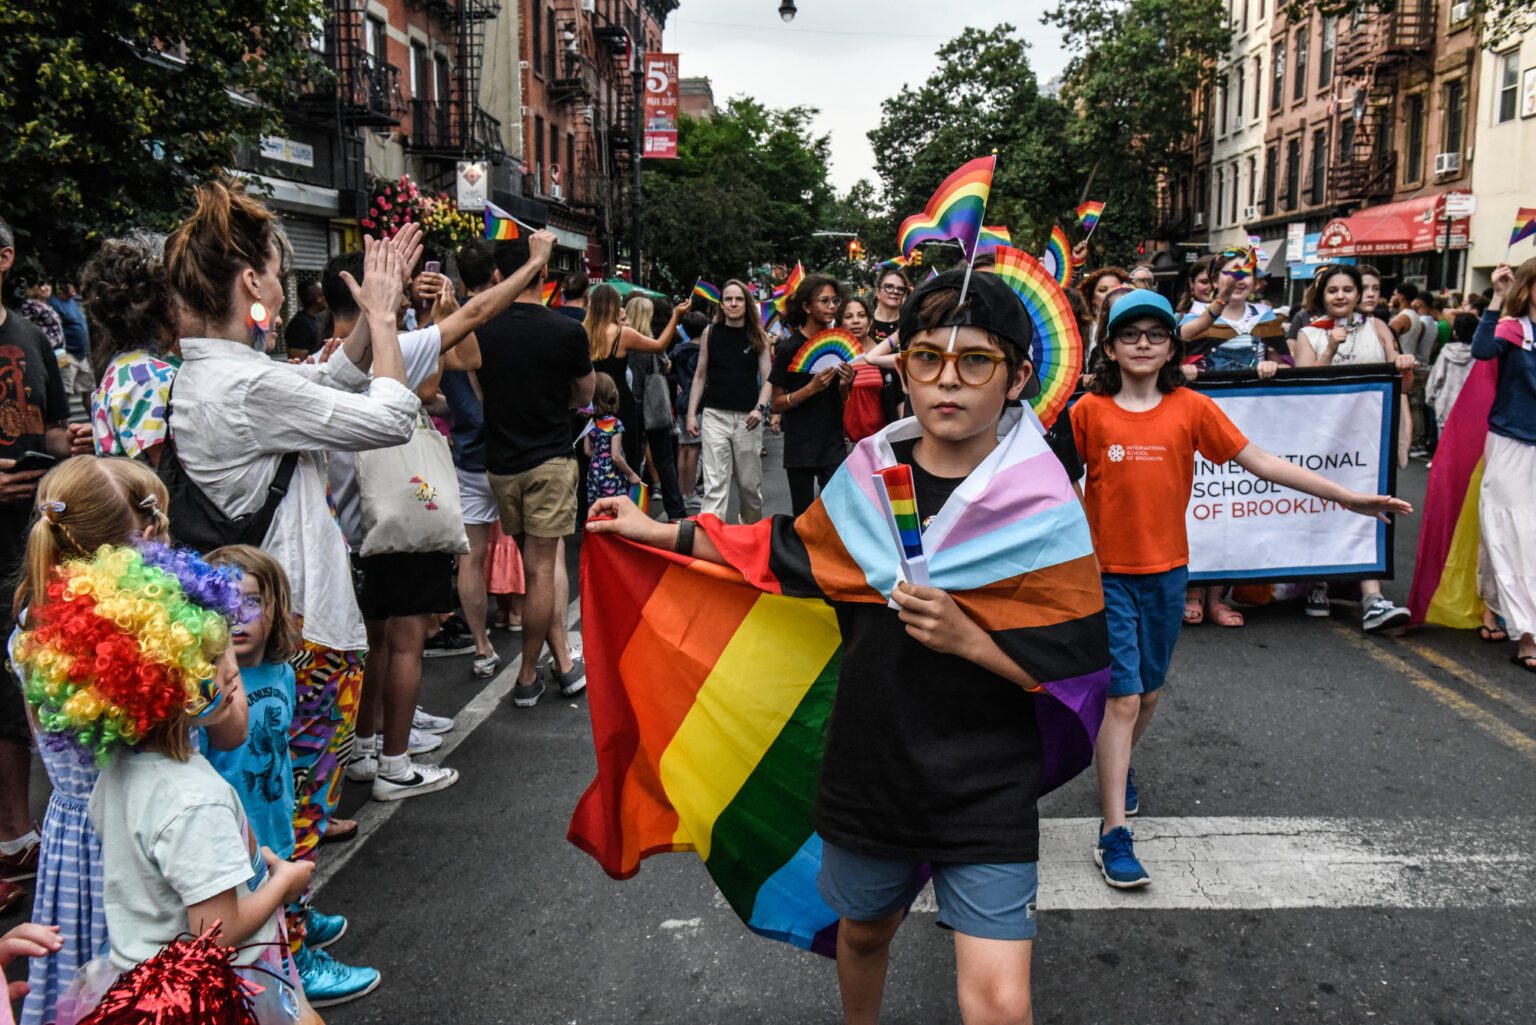 Scenes from the 2023 Brooklyn Pride Parade in Park Slope Brooklyn